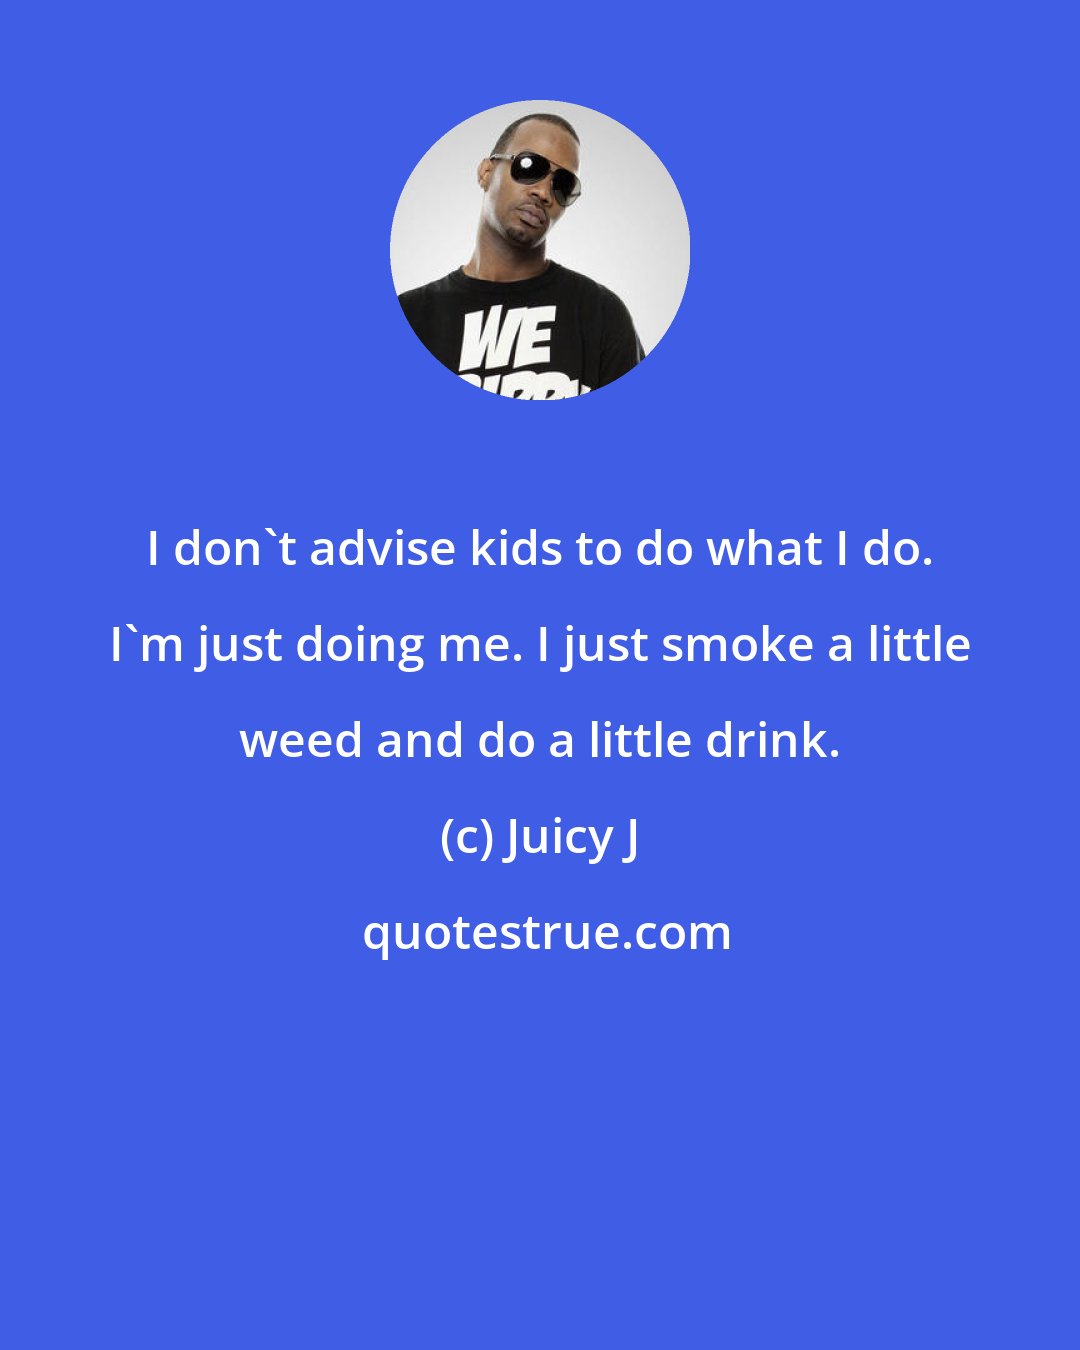 Juicy J: I don't advise kids to do what I do. I'm just doing me. I just smoke a little weed and do a little drink.